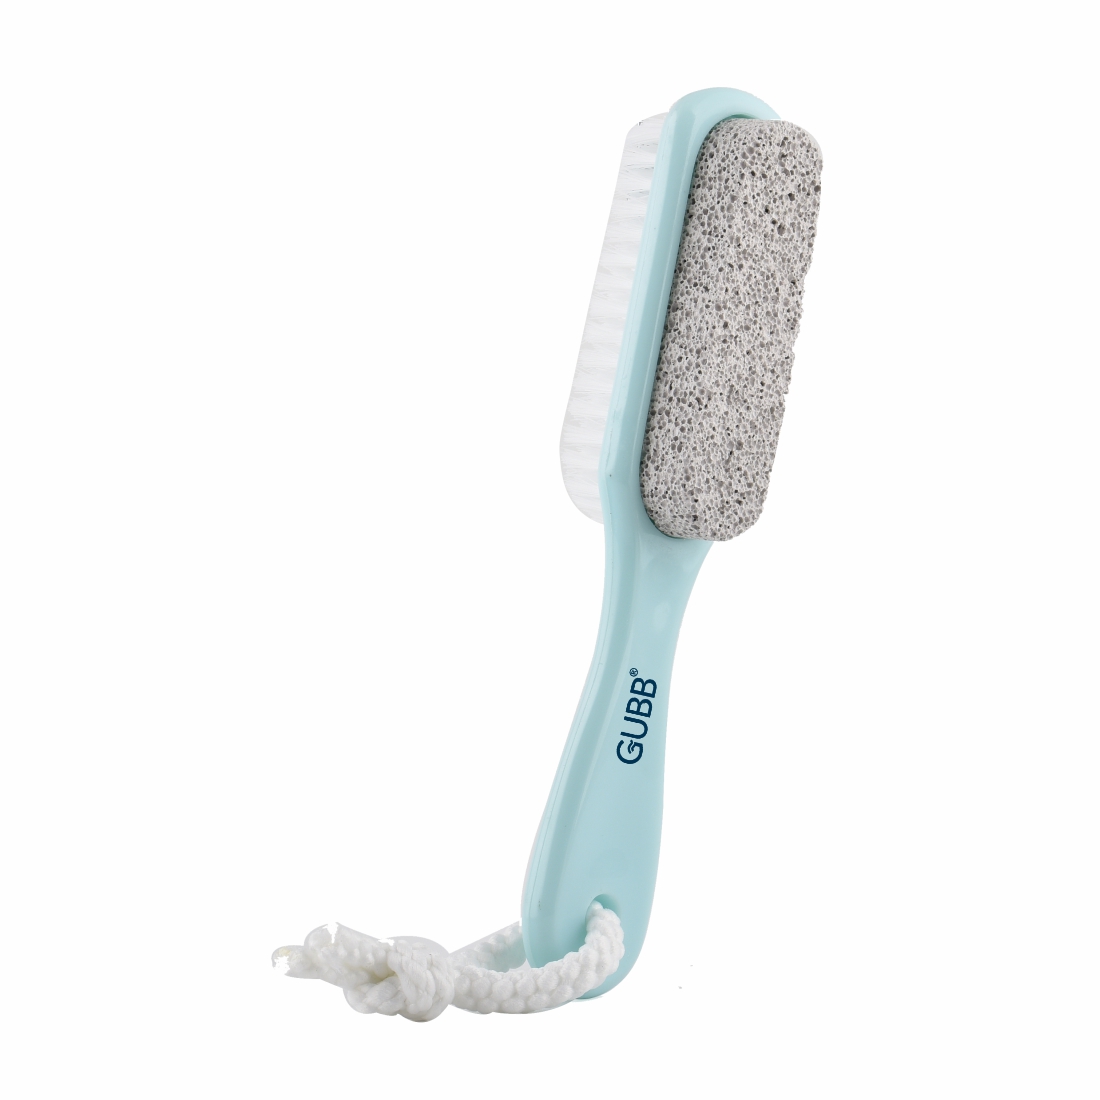 2 In 1 Foot Brush With Pumice Stone